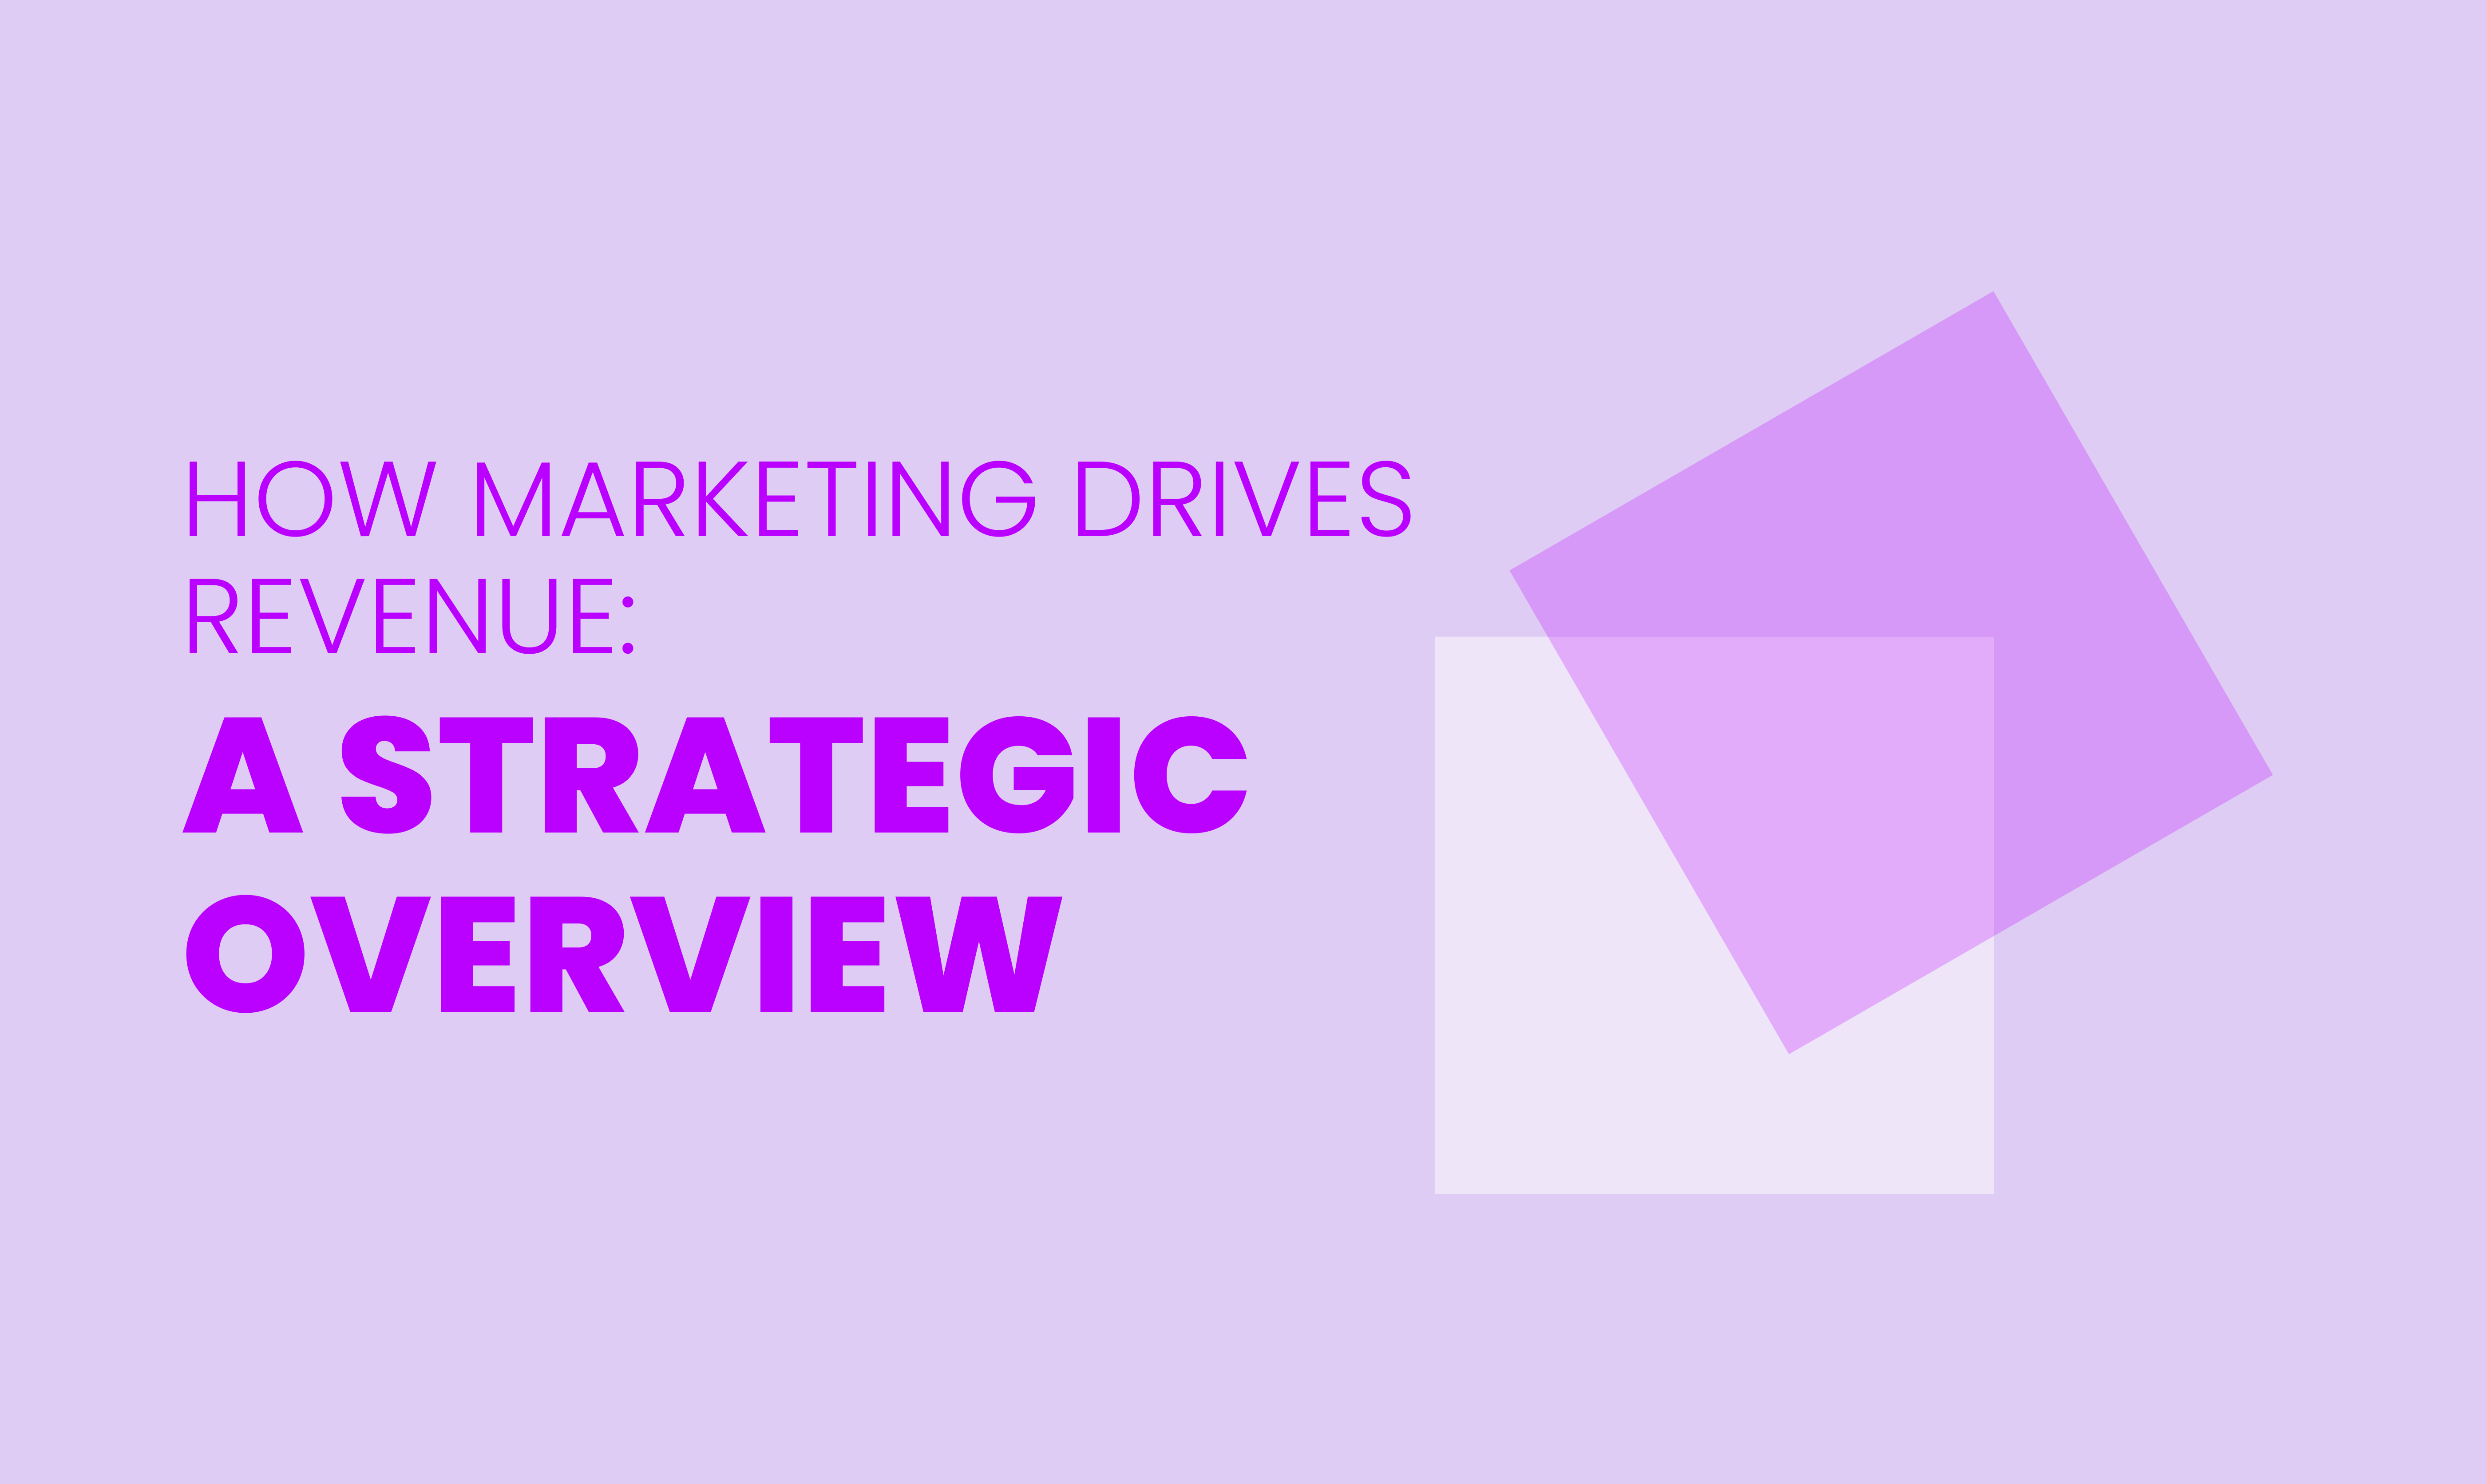 HOW MARKETING DRIVES REVENUE:  A STRATEGIC OVERVIEW